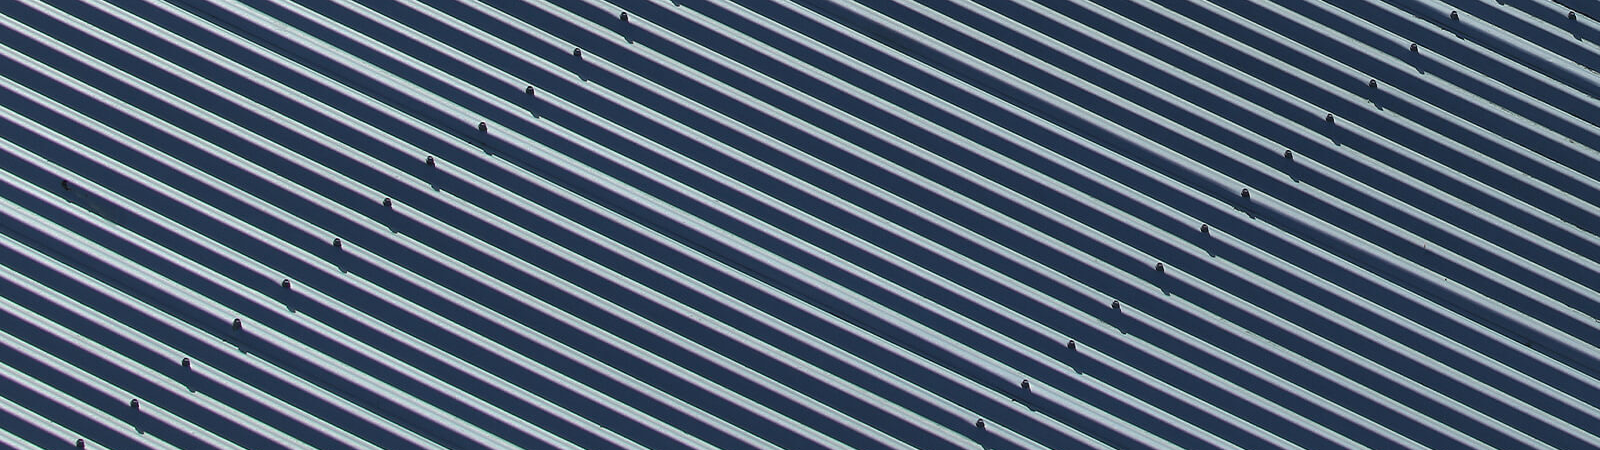 Close up of metal roof